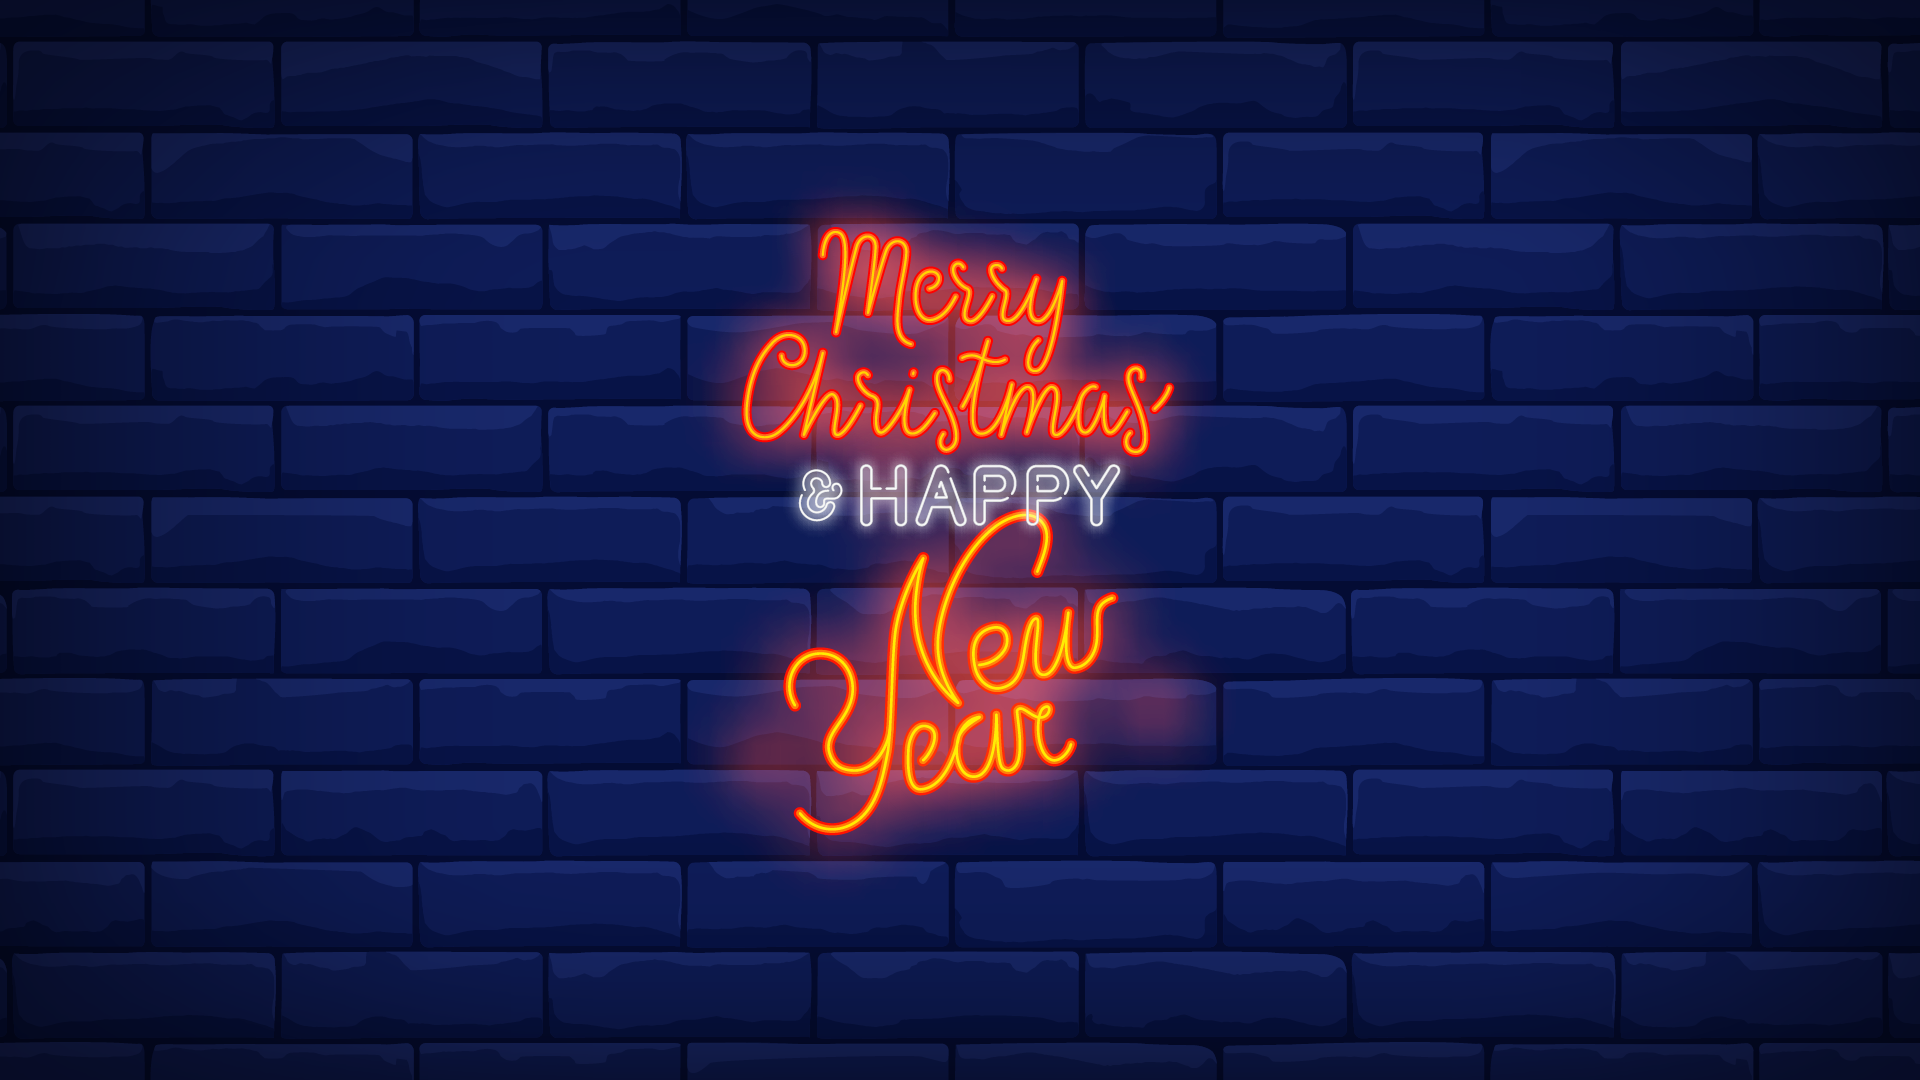 MERRY CHRISTMAS AND HAPPY NEW YEAR WALLPAPER DESKTOP